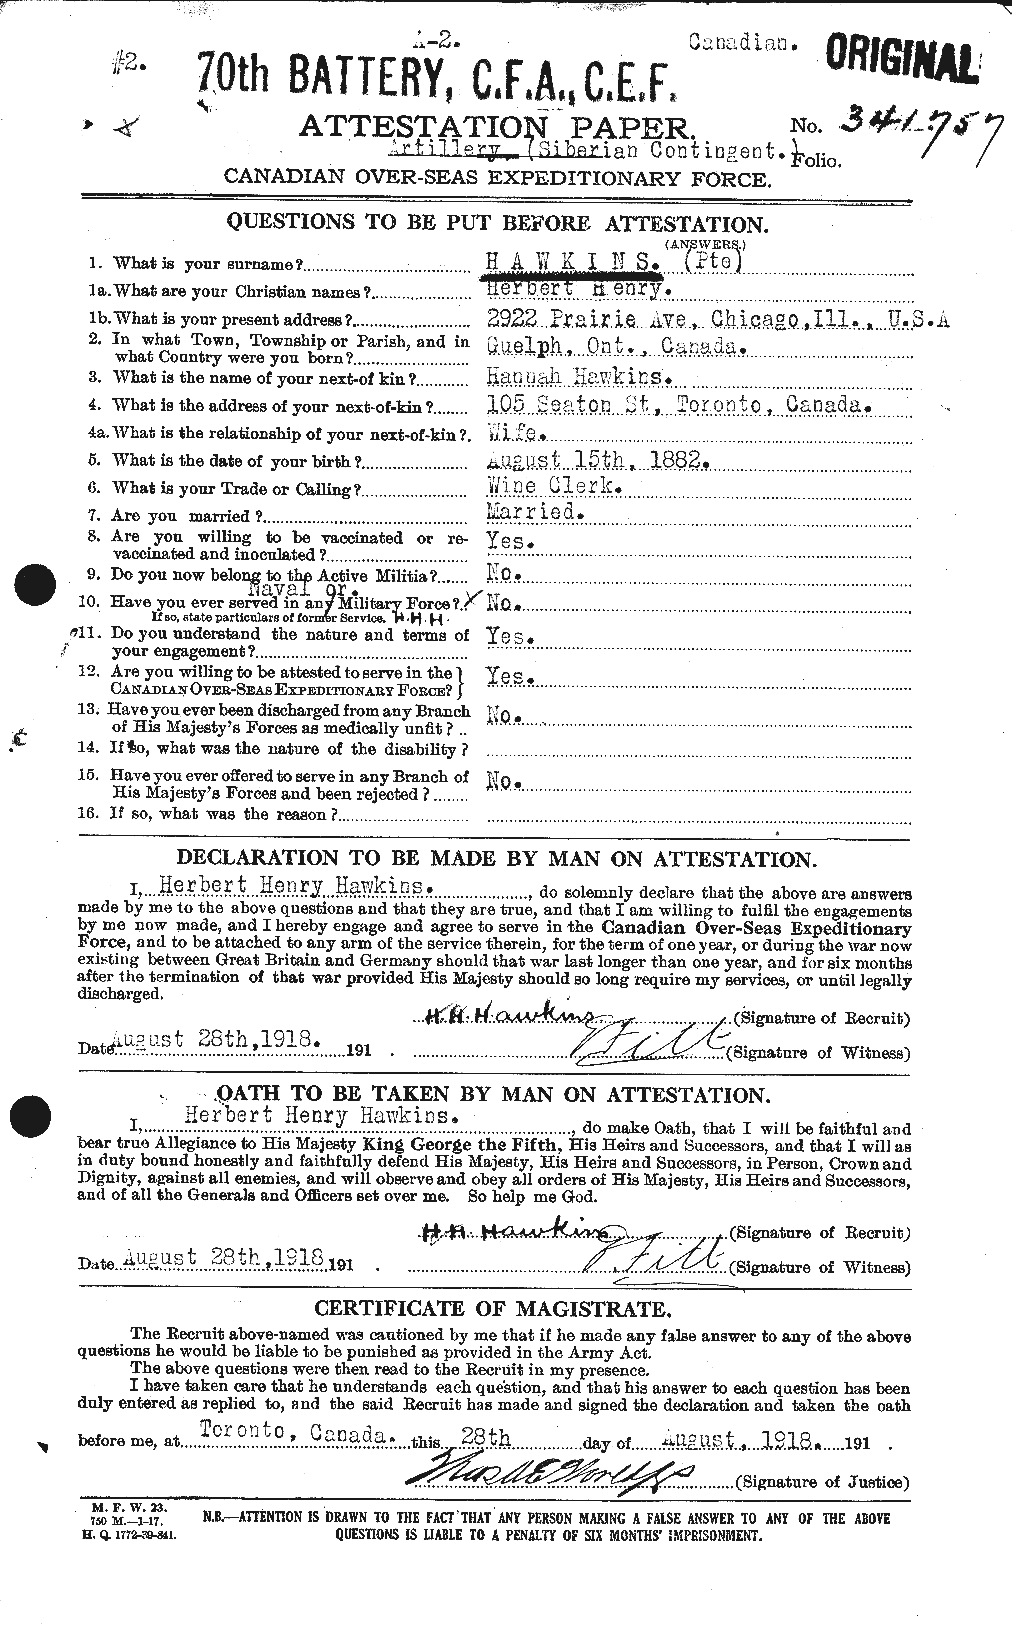 Personnel Records of the First World War - CEF 387153a